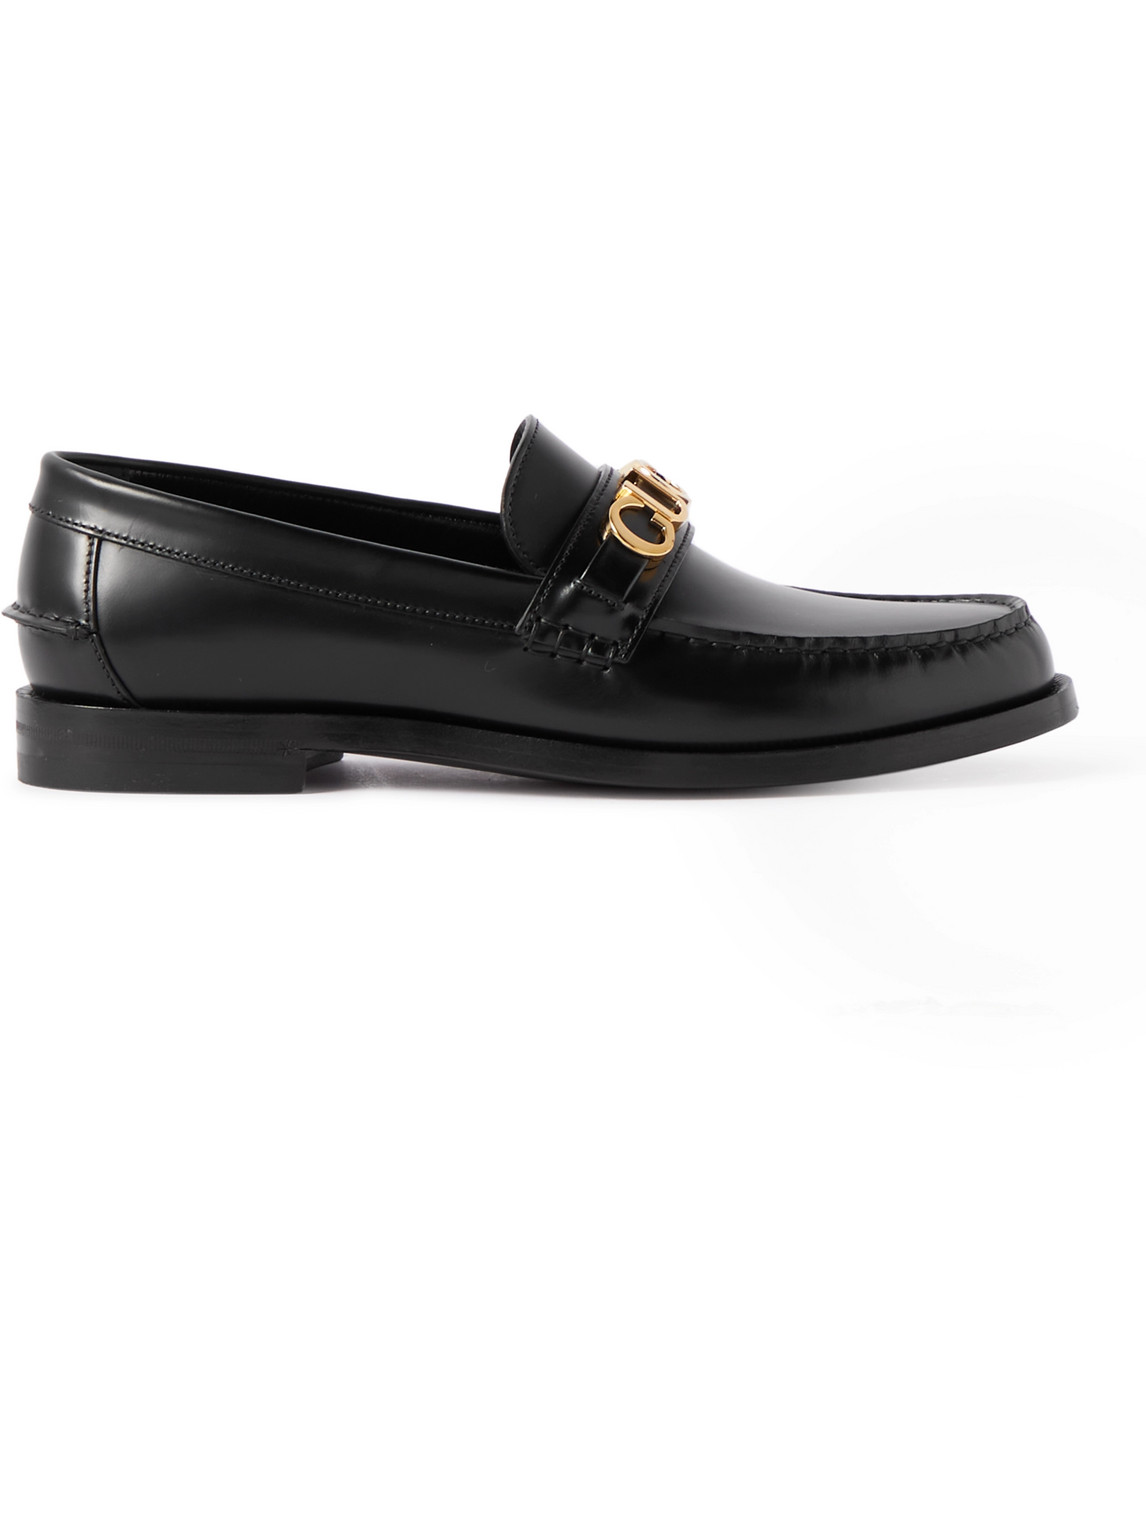 GUCCI LOGO-EMBELLISHED LEATHER LOAFERS